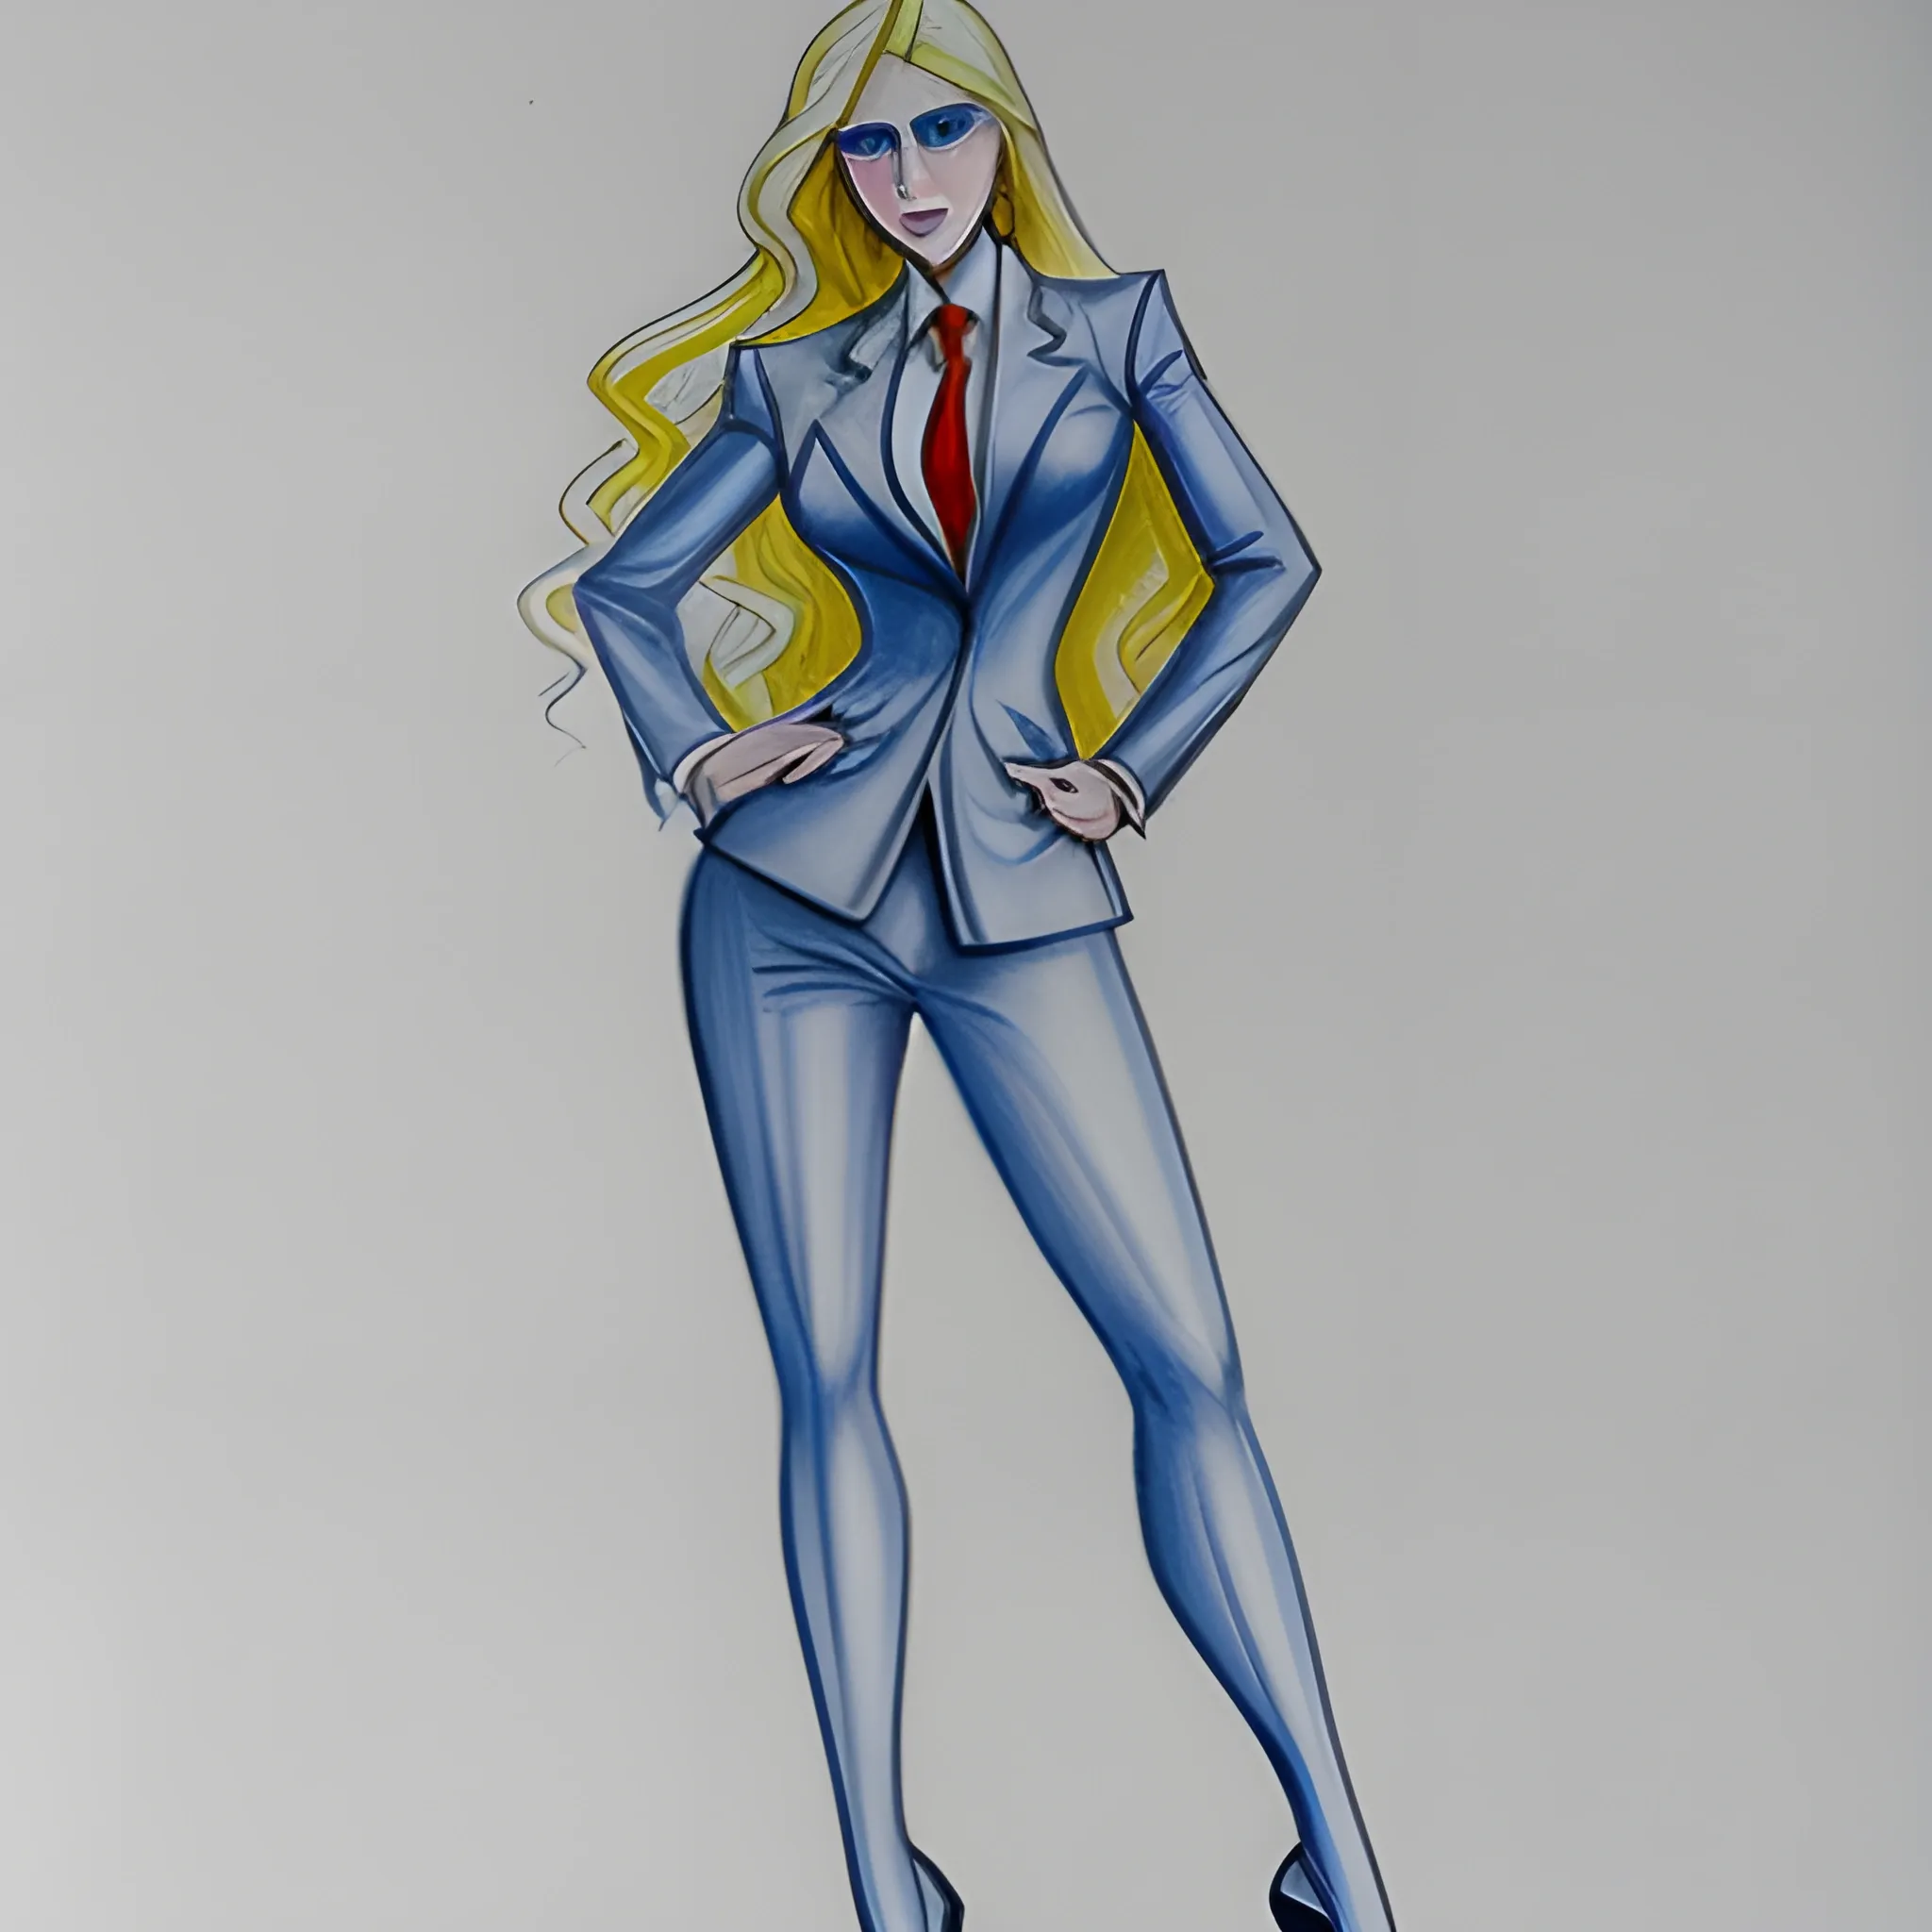 Blue eyes, very long and thick blonde hair, dramatic hourglass figure, five-foot five-inches tall, wearing high-heels, business suit, pencil sketch
